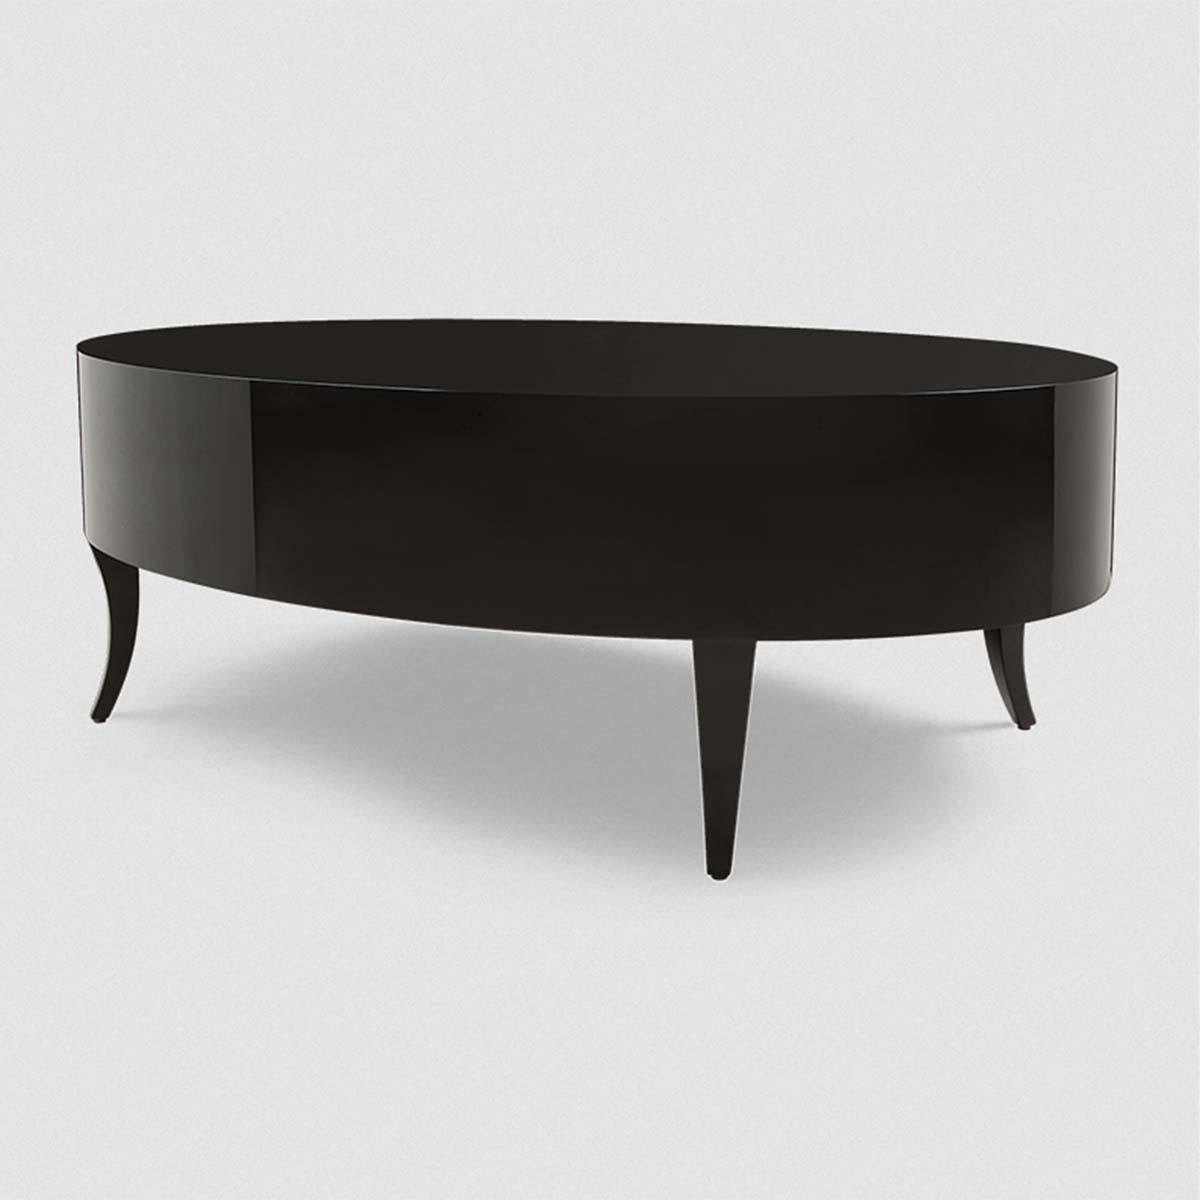 Coffee table oval black lak with solid mahogany
wood structure and with veneered mahogany in black
lacquered finish.